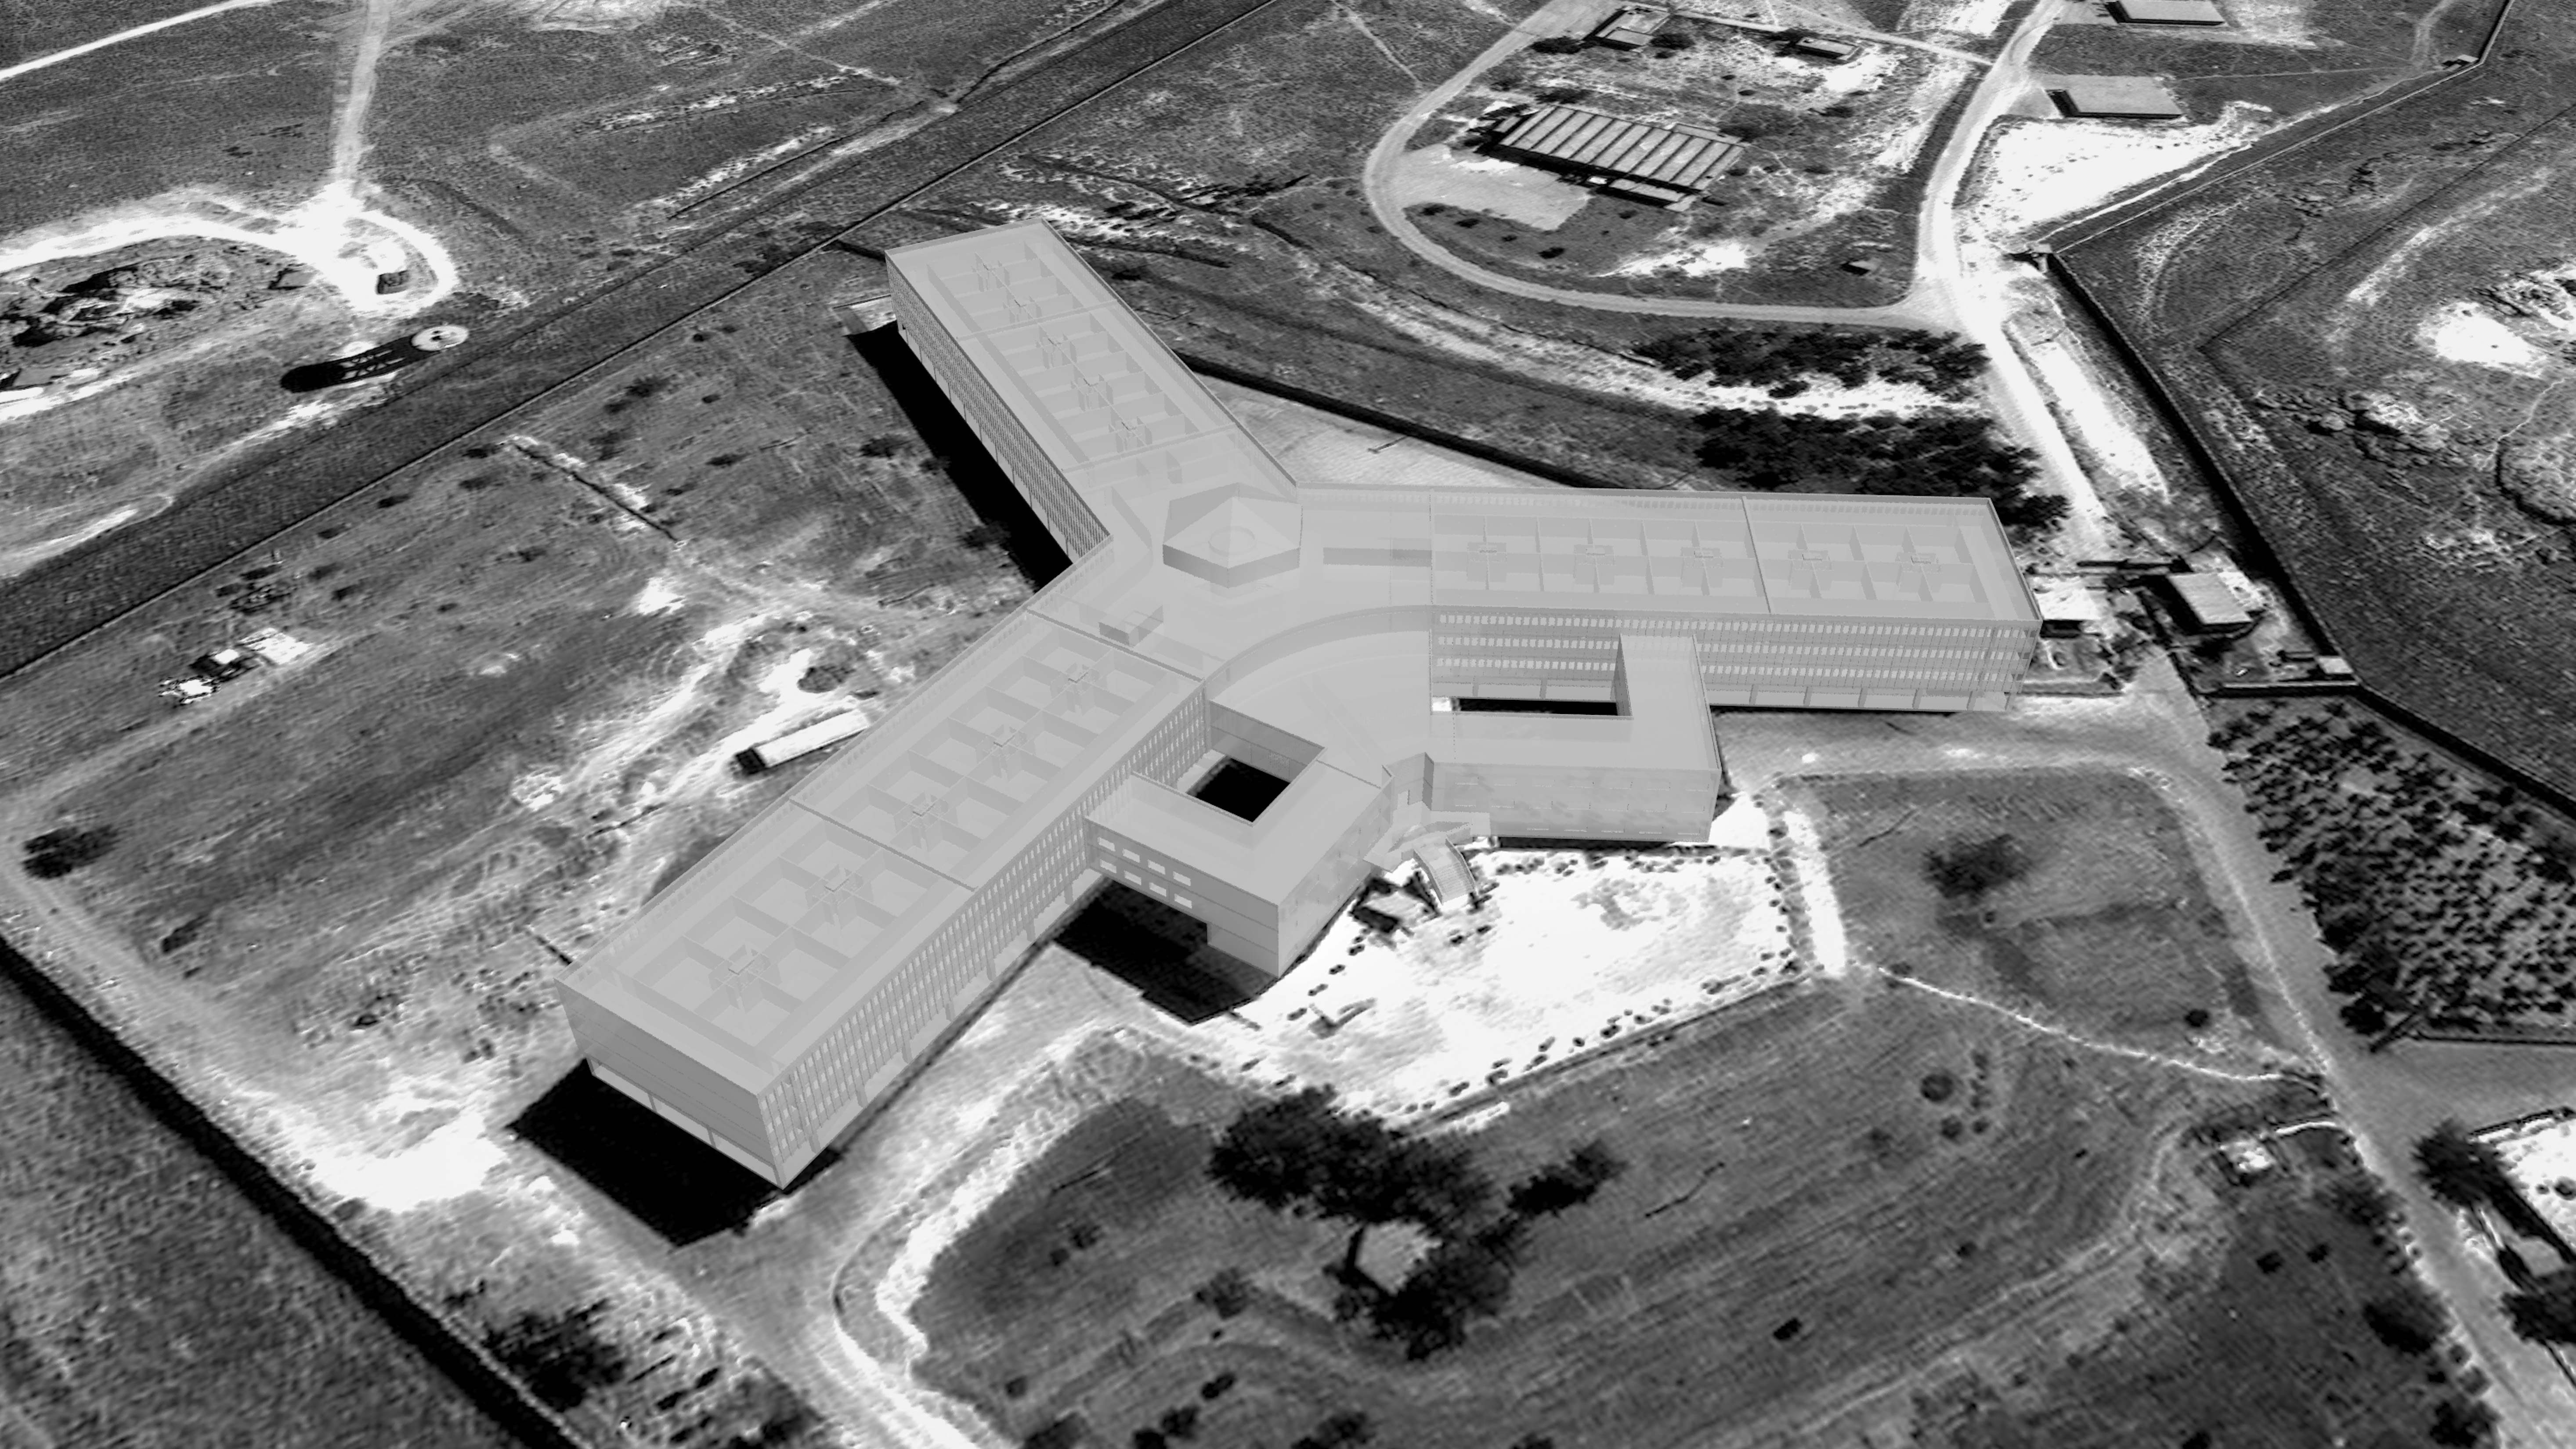 Forensic Architecture, Saydnaya Prison, reconstructed using architectural and acousting modelling (Forensic Architecture 2016)